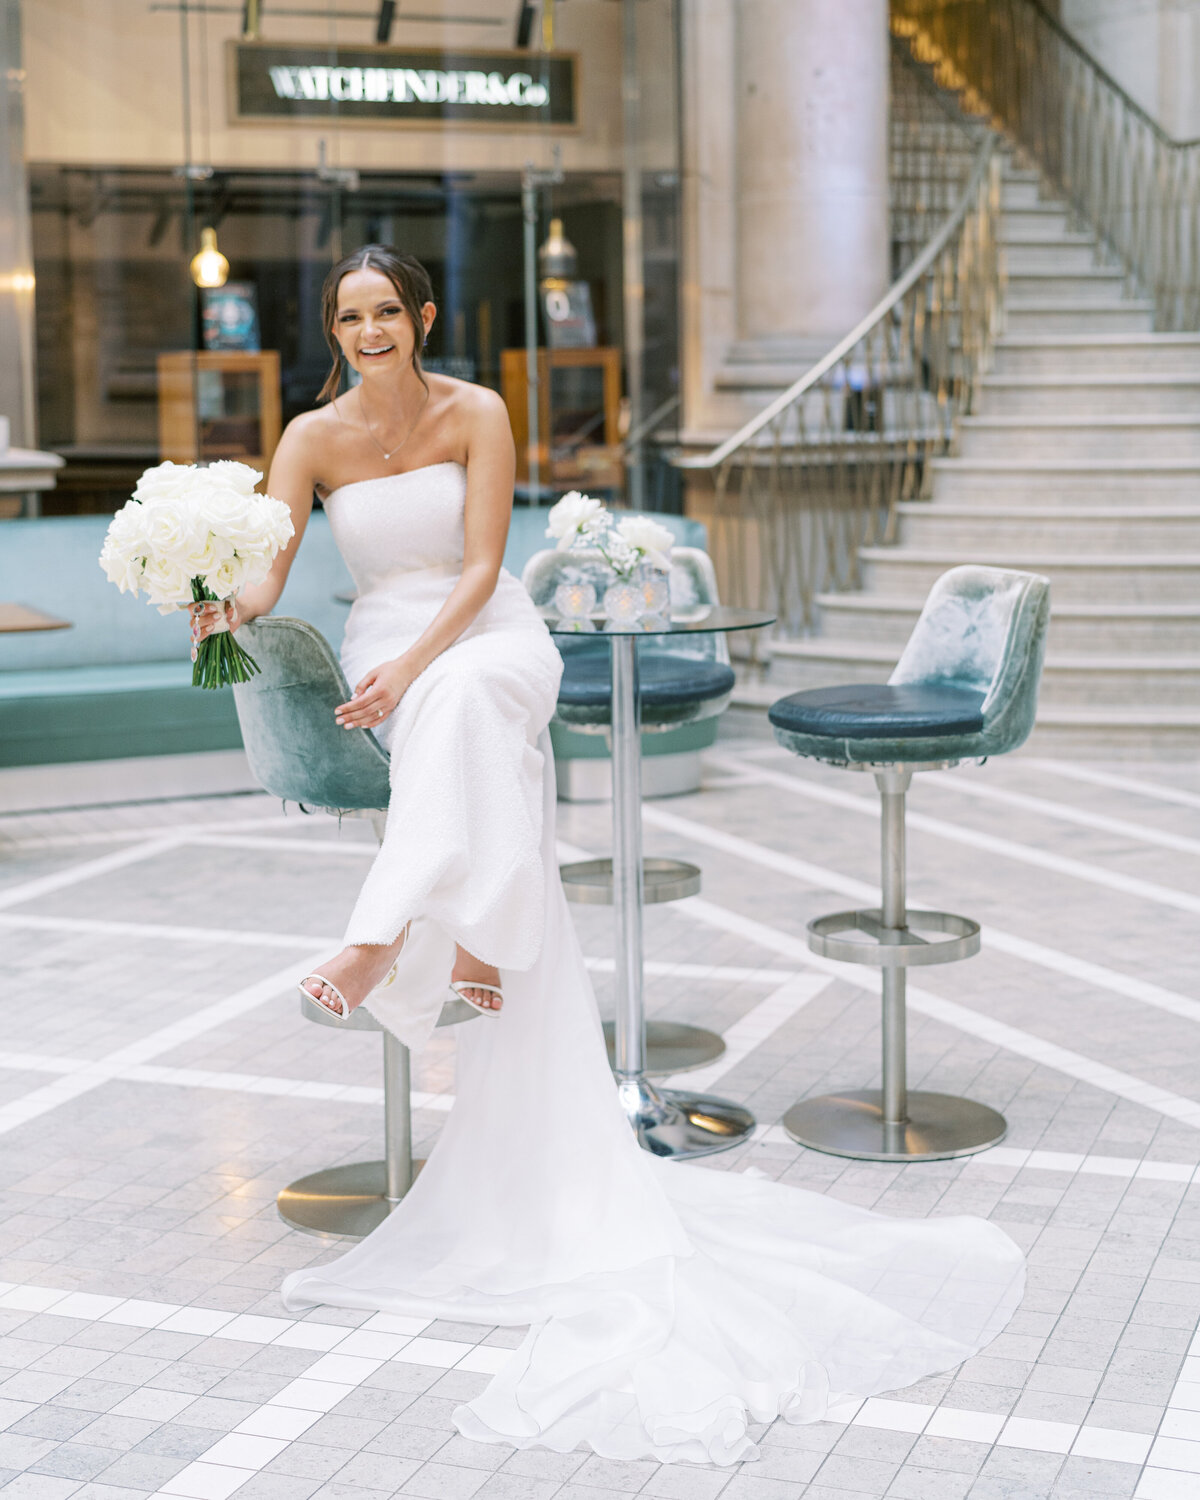 Bride wearing Suzanne Neville bridal gown at London wedding